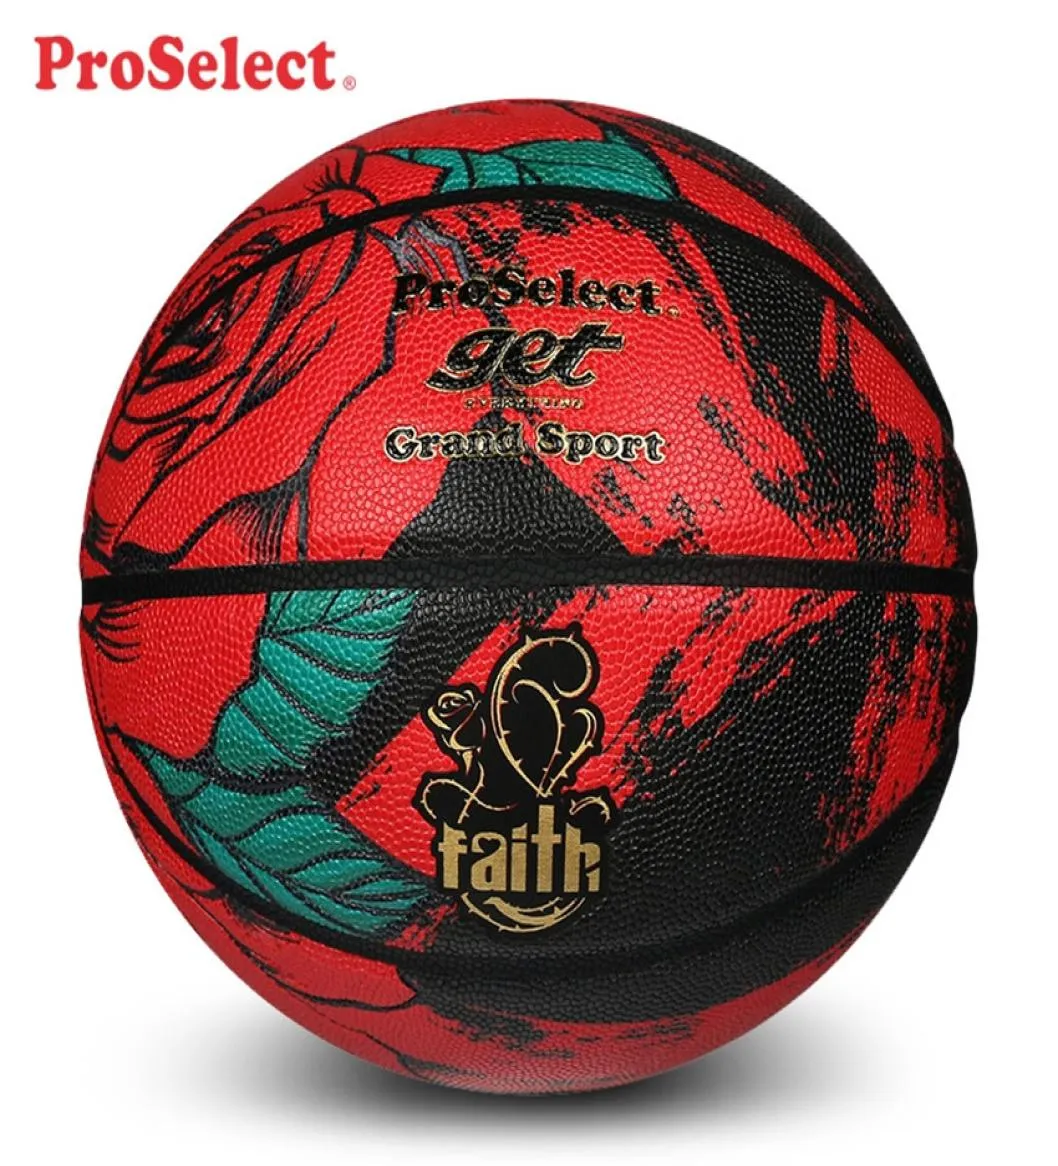 Spalding Wilson Proselect Basketball Ball Officiell Authentic Glory Rose Classic Edition inomhus utomhus Universal Antislip Wearre4371016